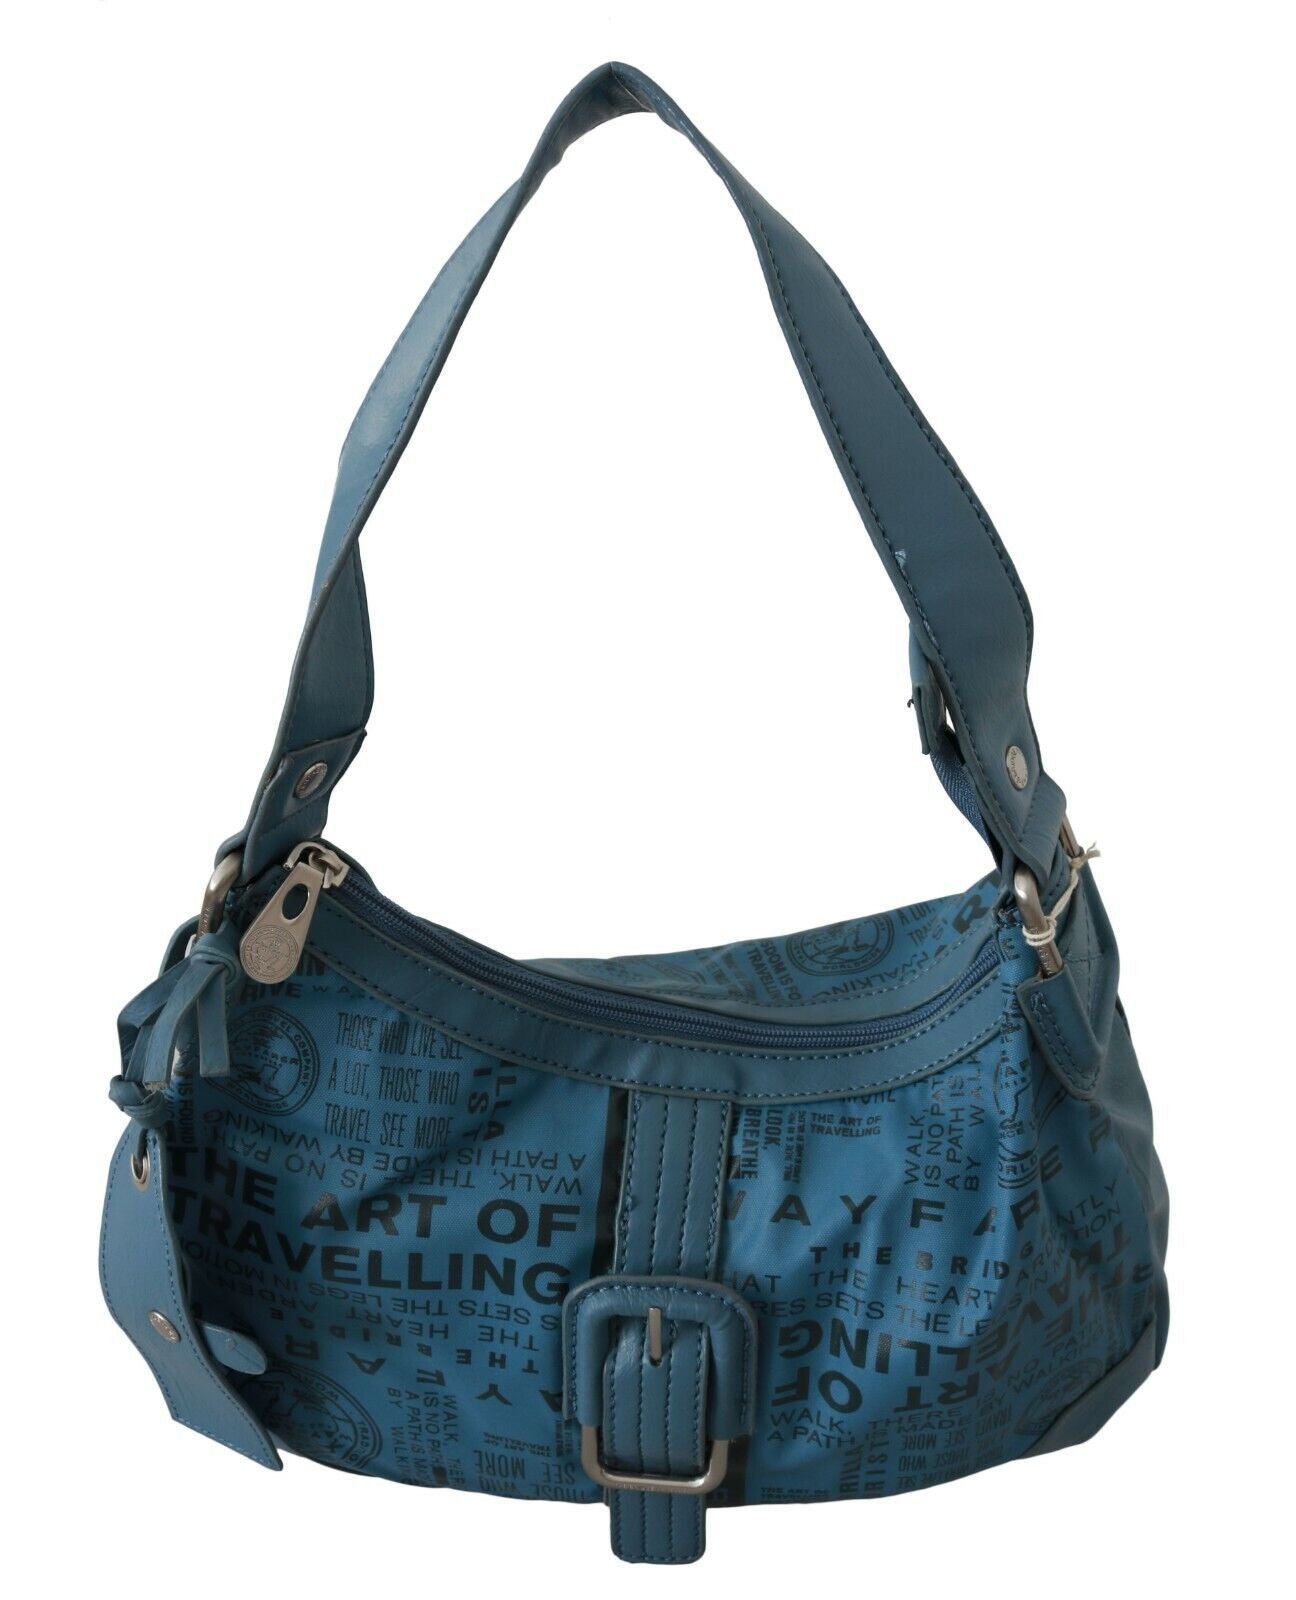 Chic Blue Fabric Shoulder Bag - Perfect for Everyday Elegance